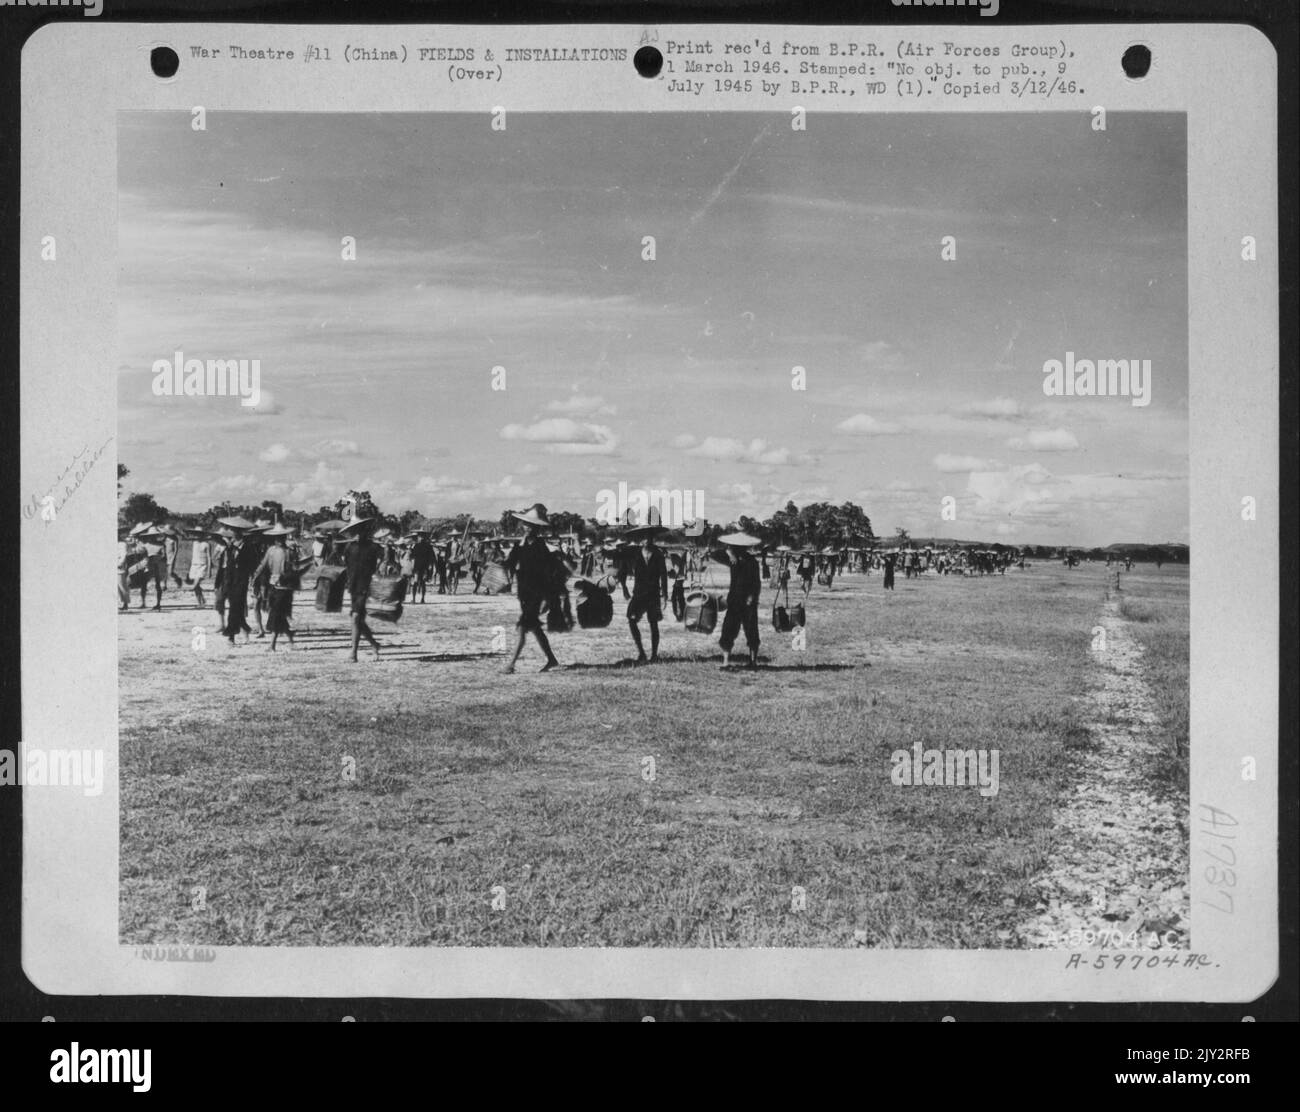 Four Days After The Japaneses Left The Nanning Airbase In China With Its Bomb Craters, Ditches And Landmines, The 14Th Af Aviation Engineers Had Rounded Up Close To A Thousand Coolies And By The End Of The Week The Ditches Were Filled And The Bomb Craters Neut Stock Photo